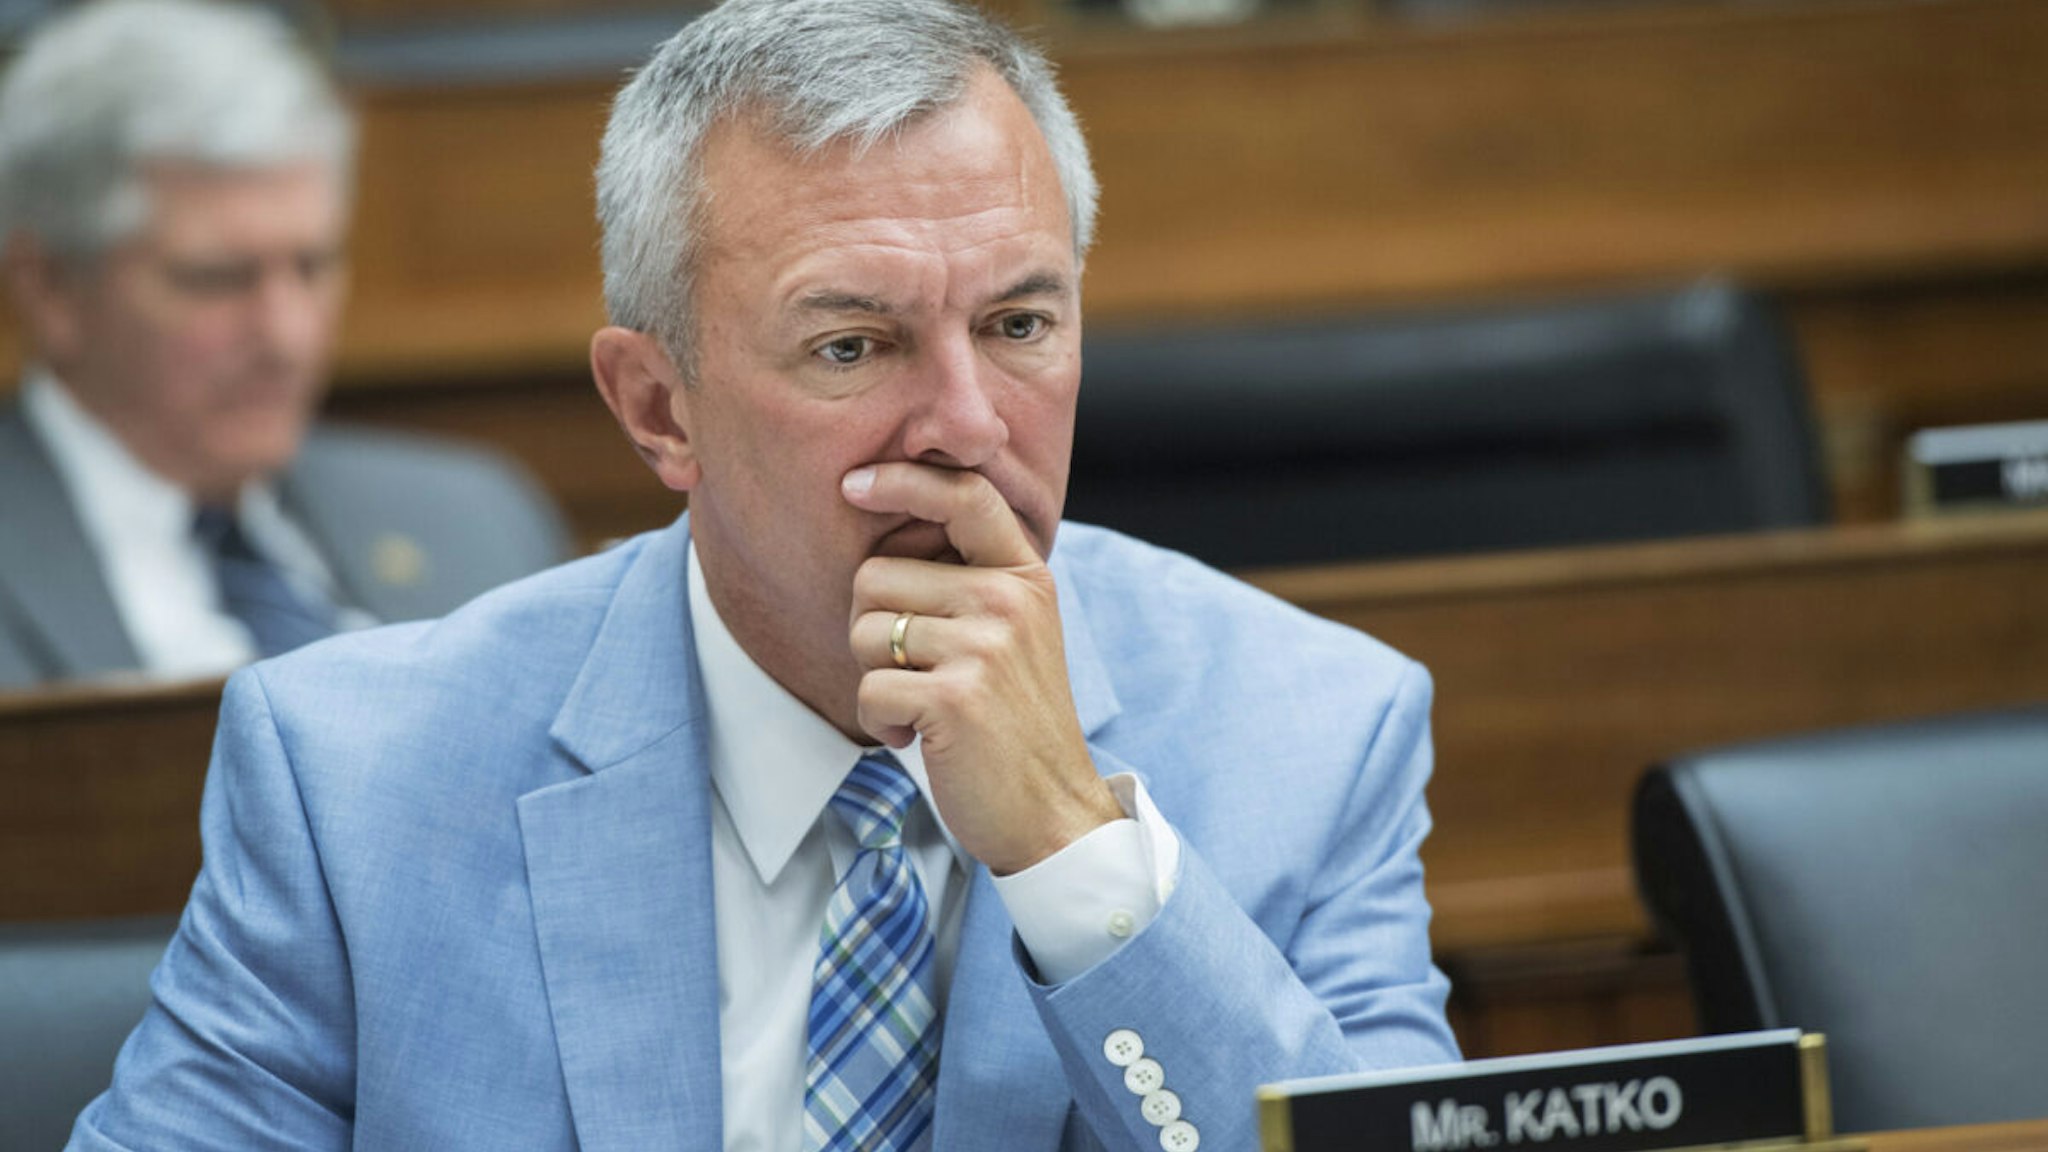 Rep. John Katko, R-N.Y., attends a House Transportation and Infrastructure Committee markup in Rayburn Building, September 14, 2016.